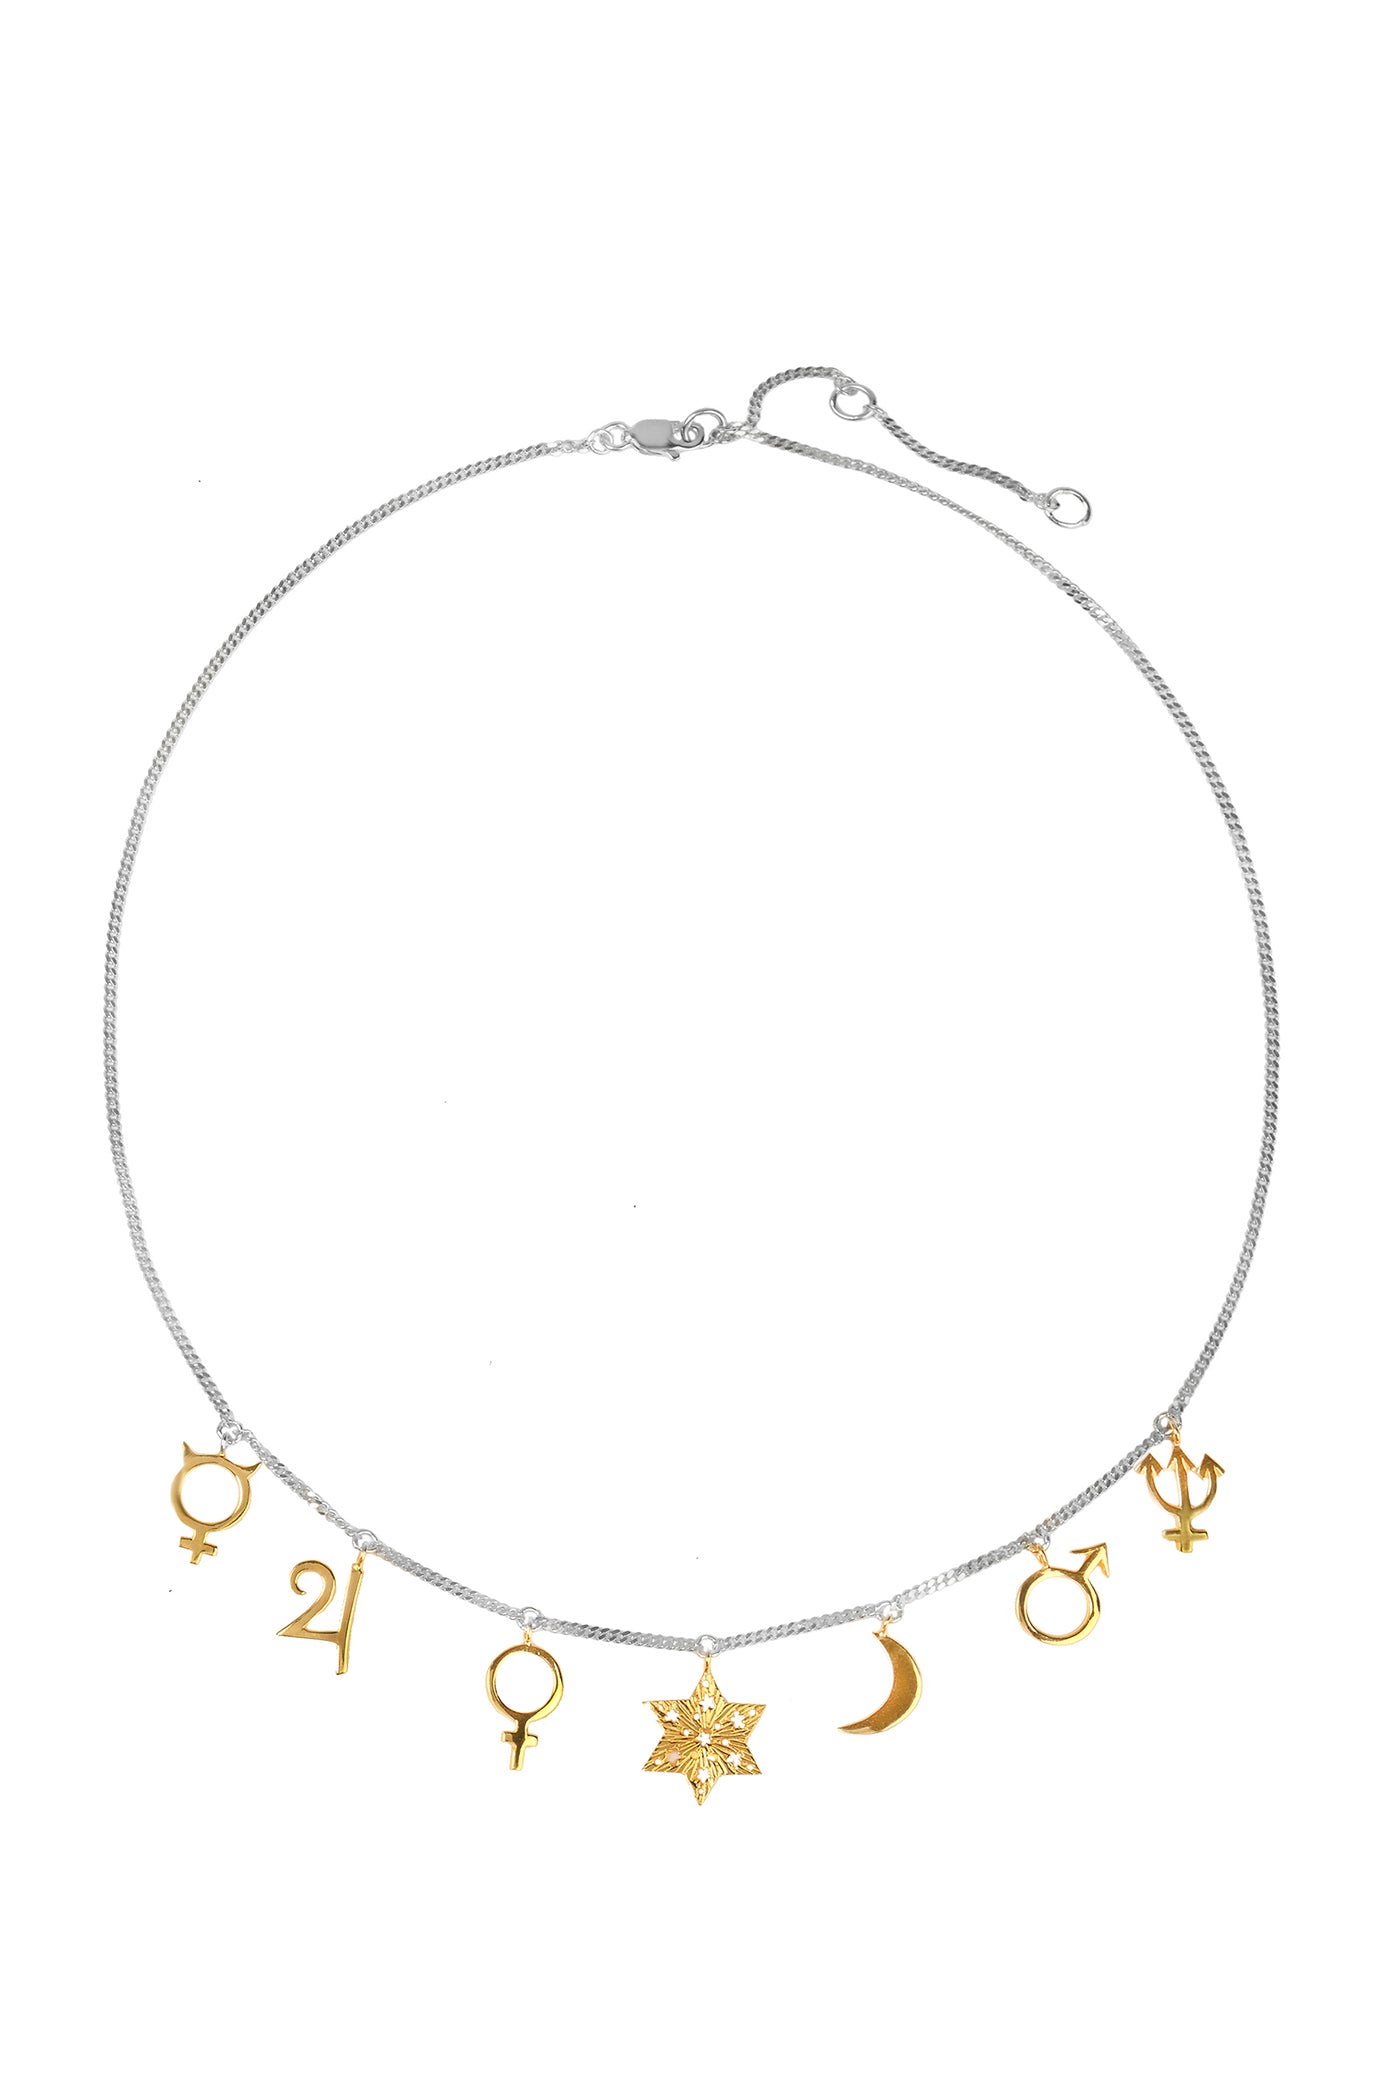 Heavenly princess choker. Silver, partly gold-plated